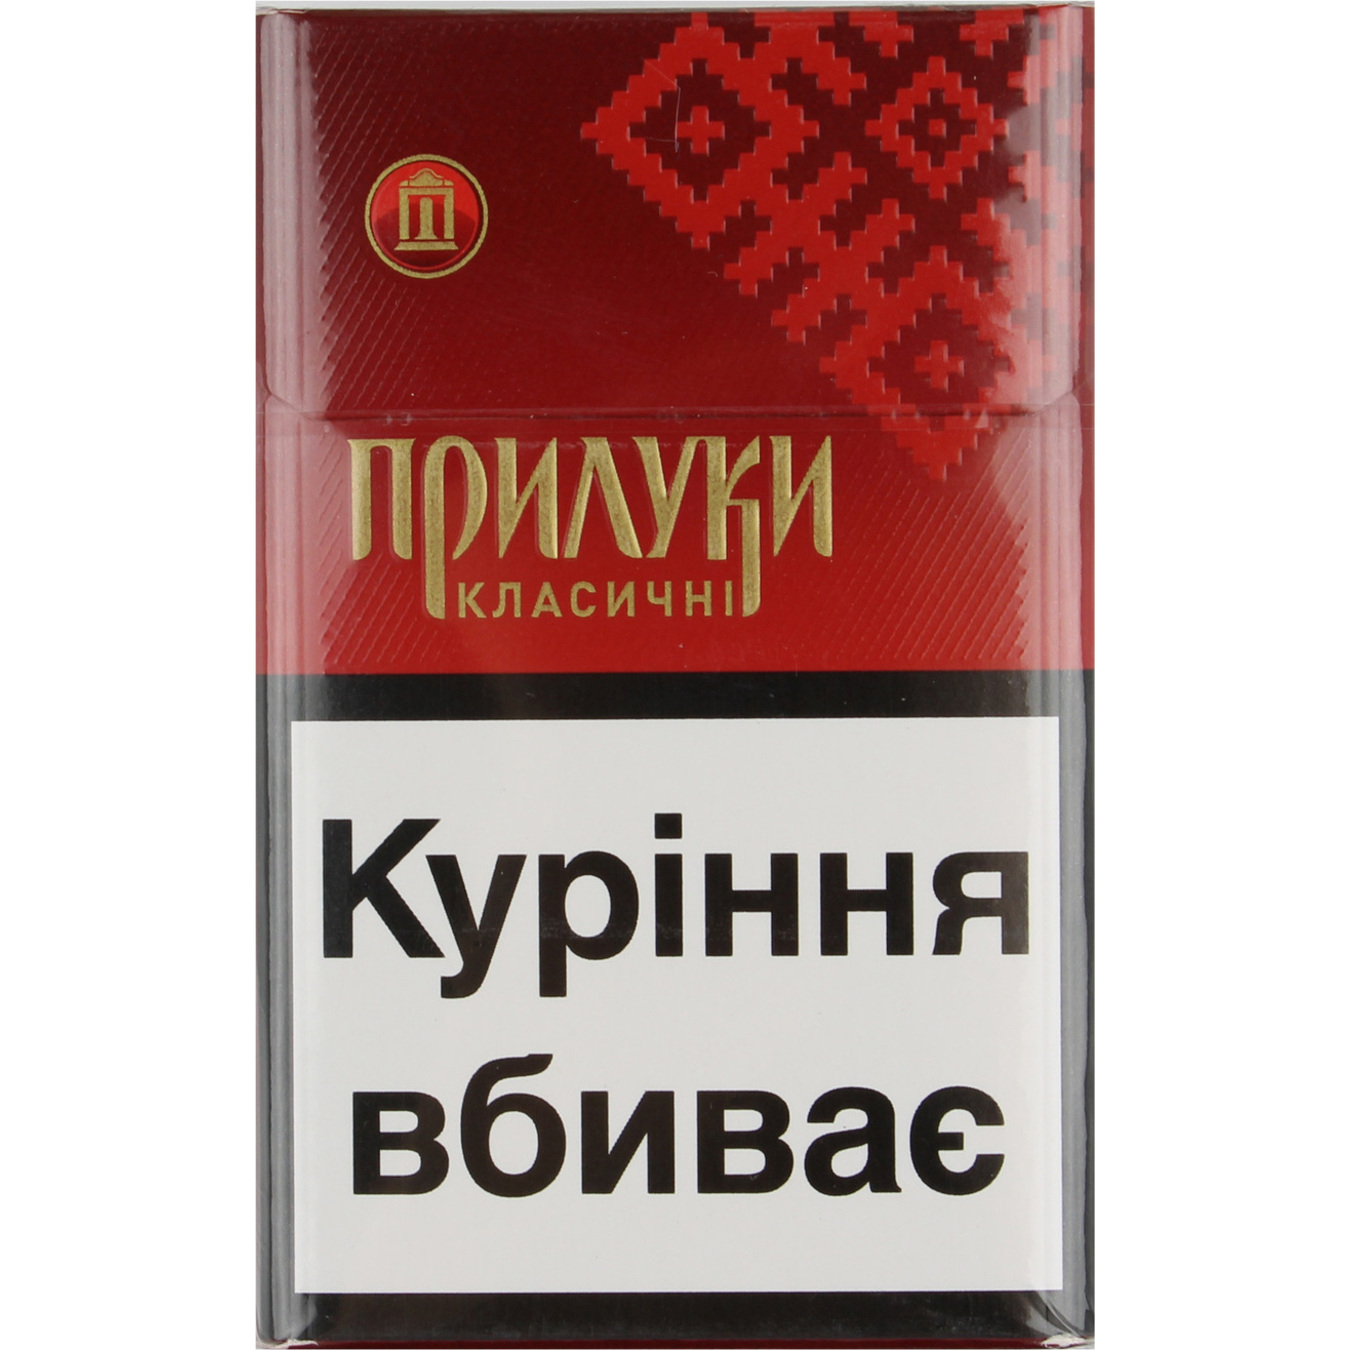 Priluki Classic Cigarettes 20 pcs (the price is indicated without excise tax)